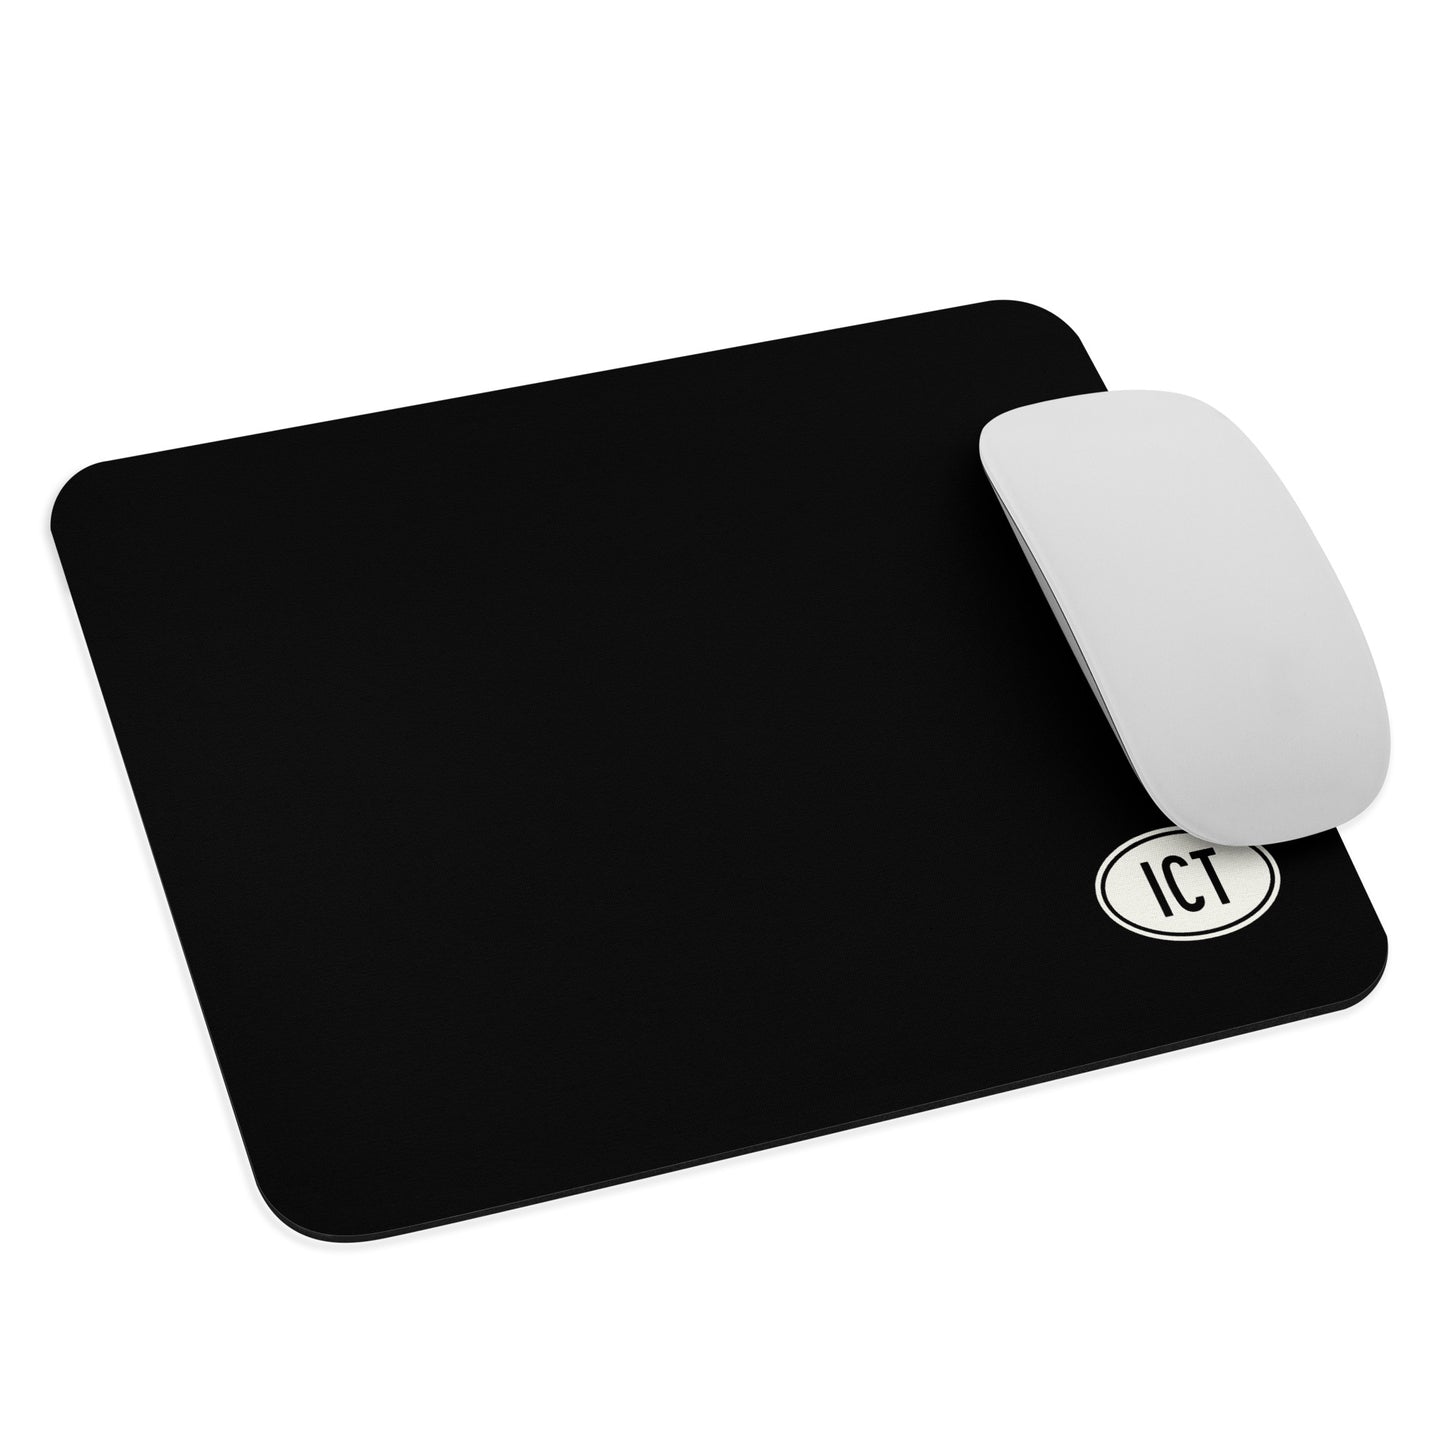 Unique Travel Gift Mouse Pad - White Oval • ICT Wichita • YHM Designs - Image 03